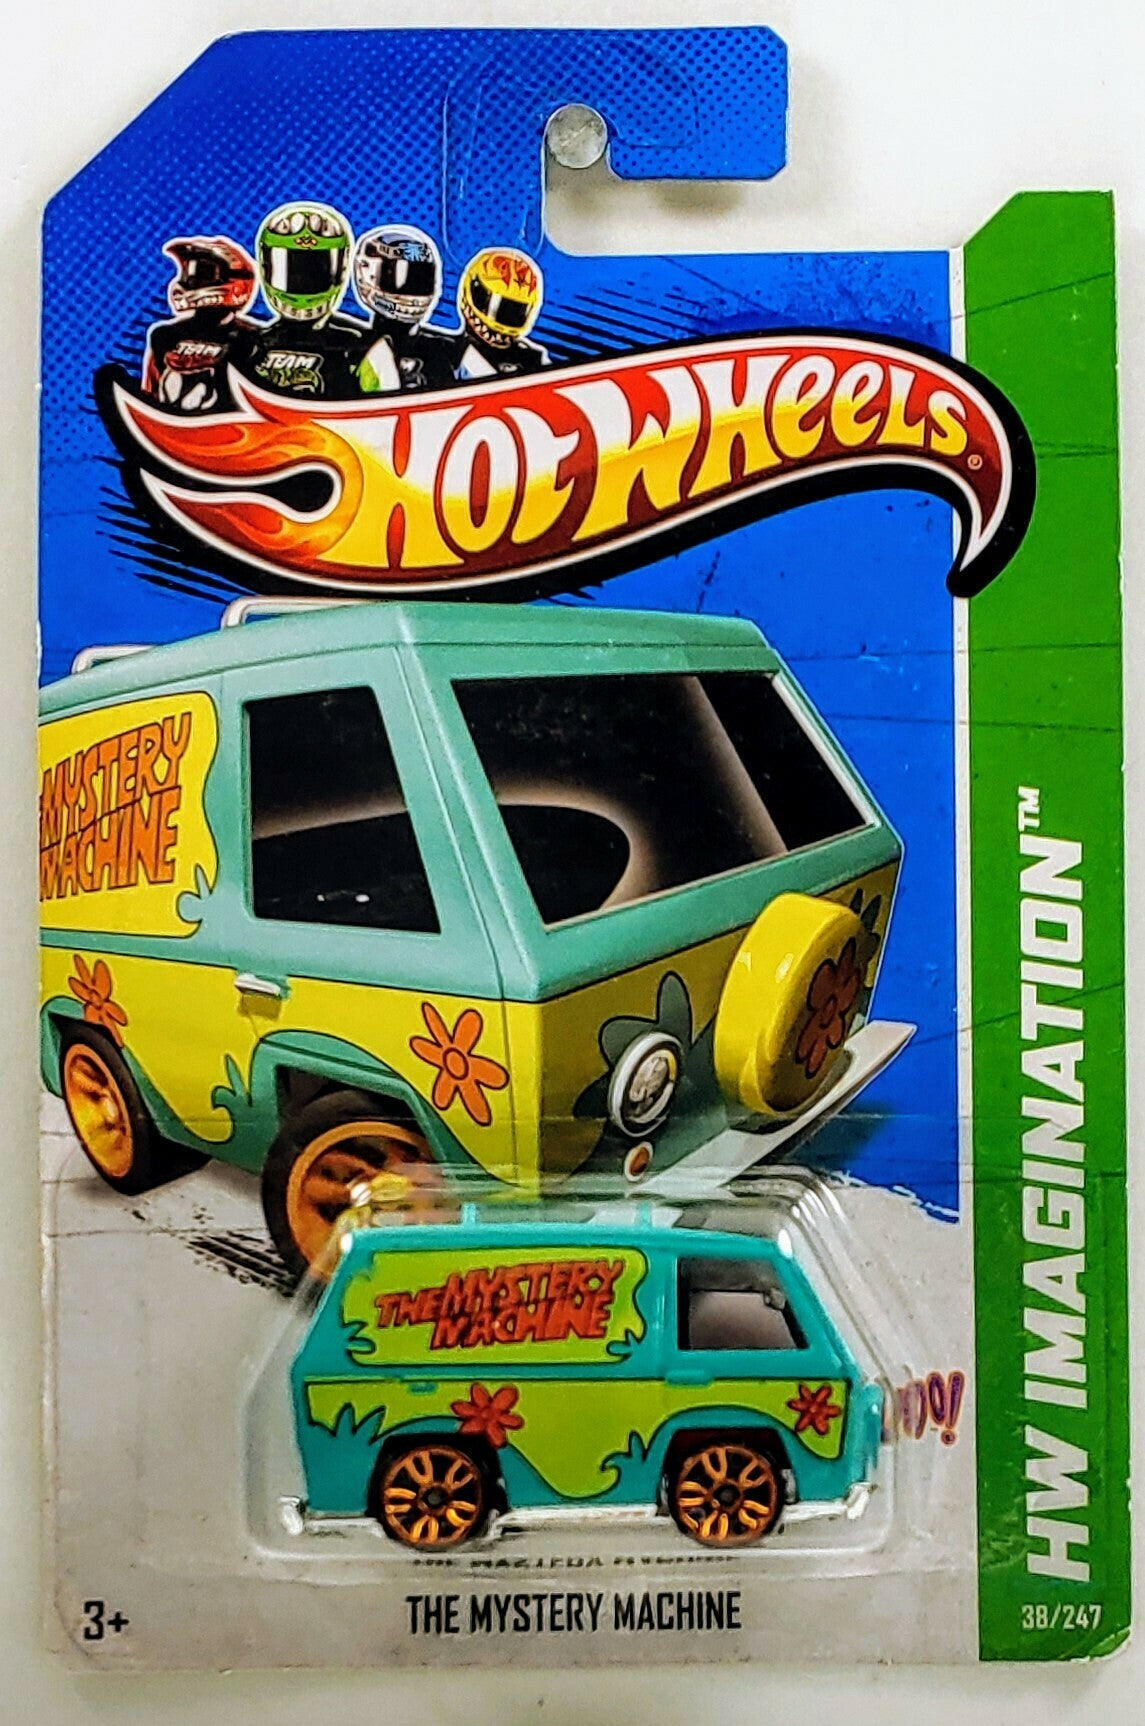 Hot Wheels 2012 - Collector # 038/247 - New Models 38/50 - The Mystery Machine - Turquoise - USA '13 Card